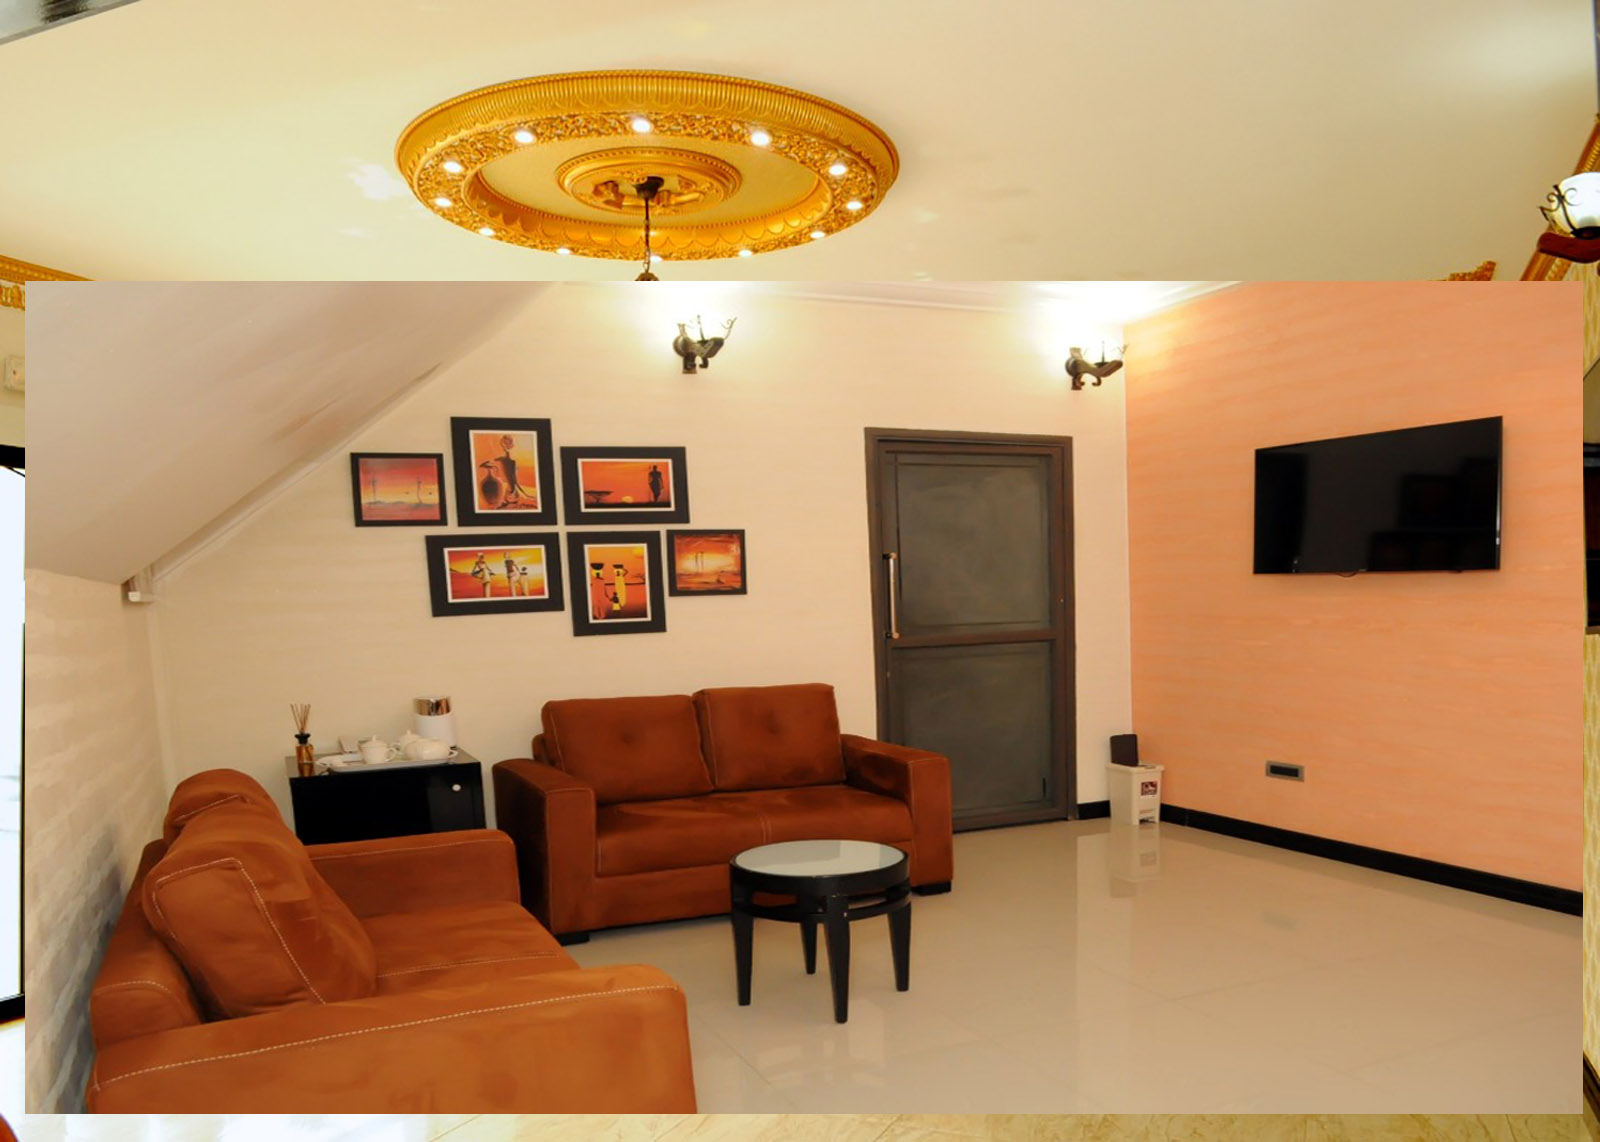 Fully furnished Rooms with an exotic aura...